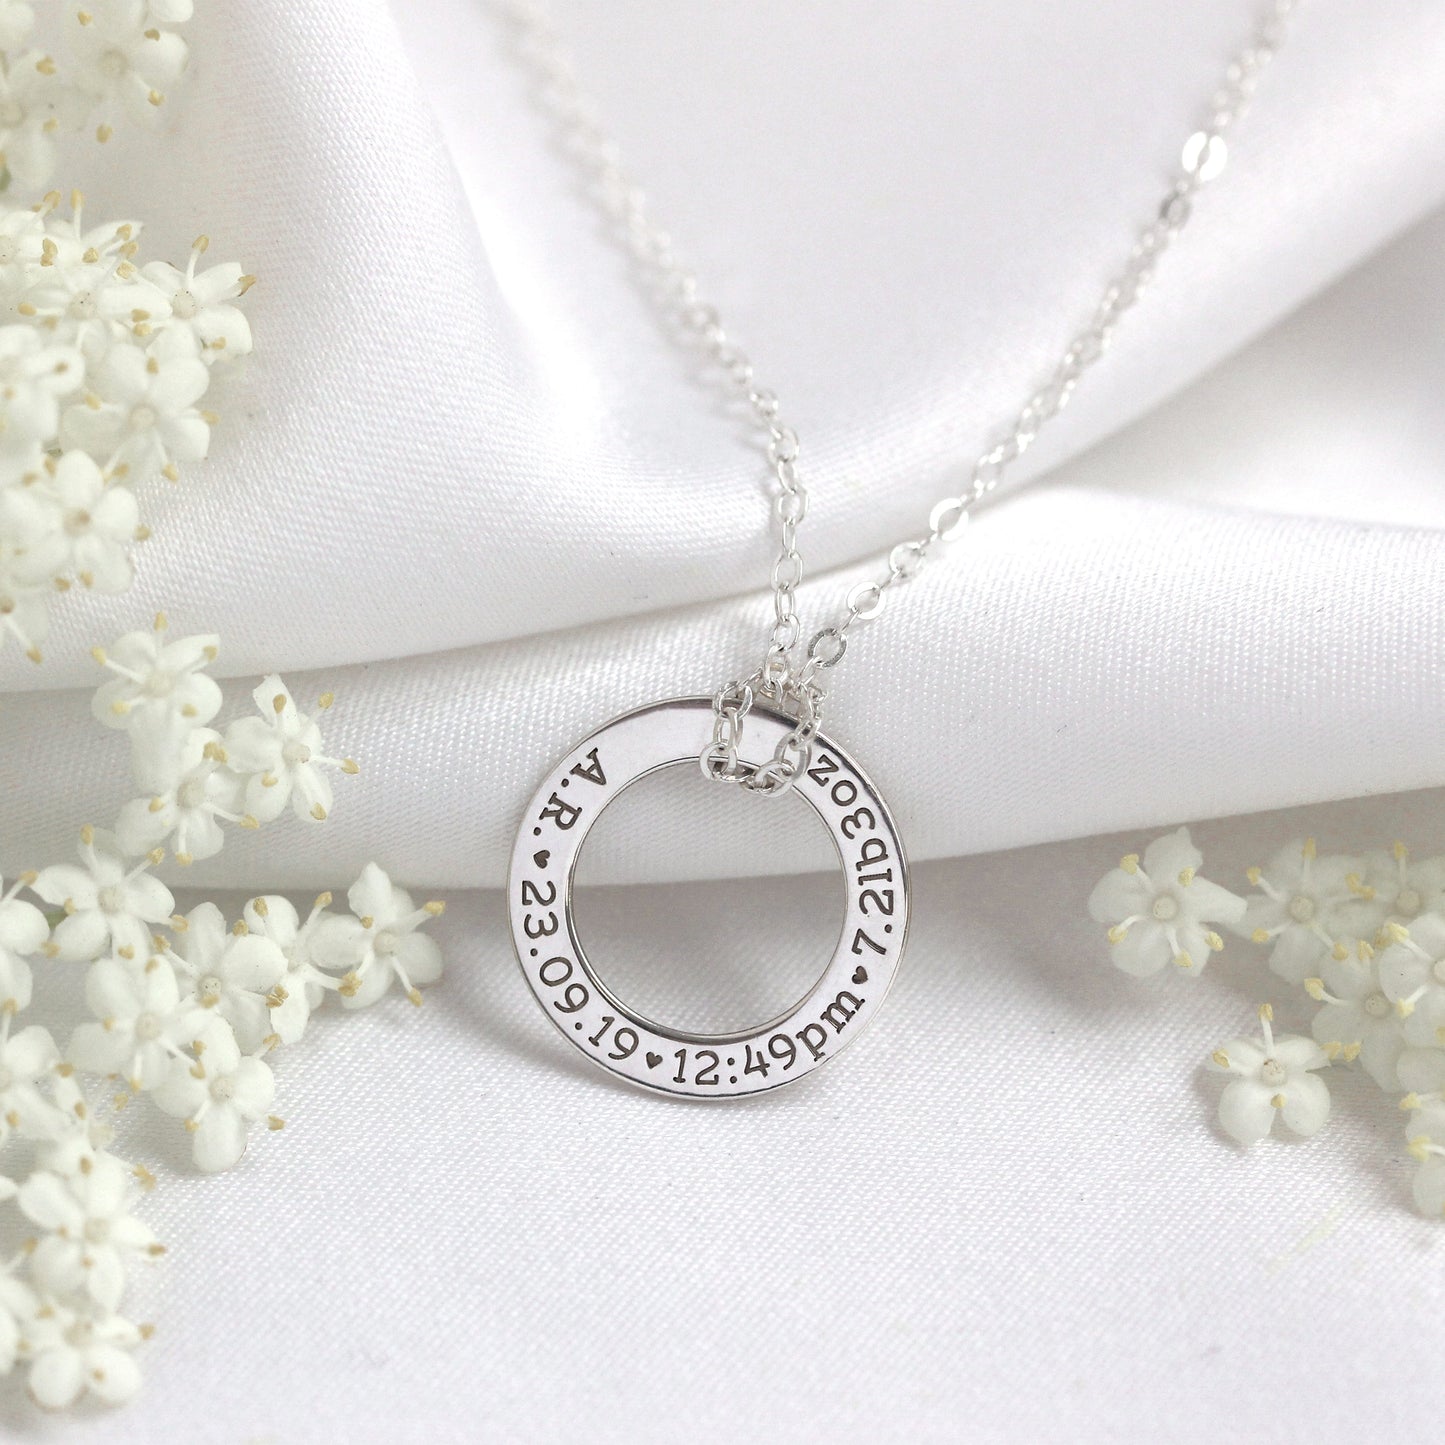 Bespoke Sterling Silver New Baby Circle Necklace 16-28 Inches